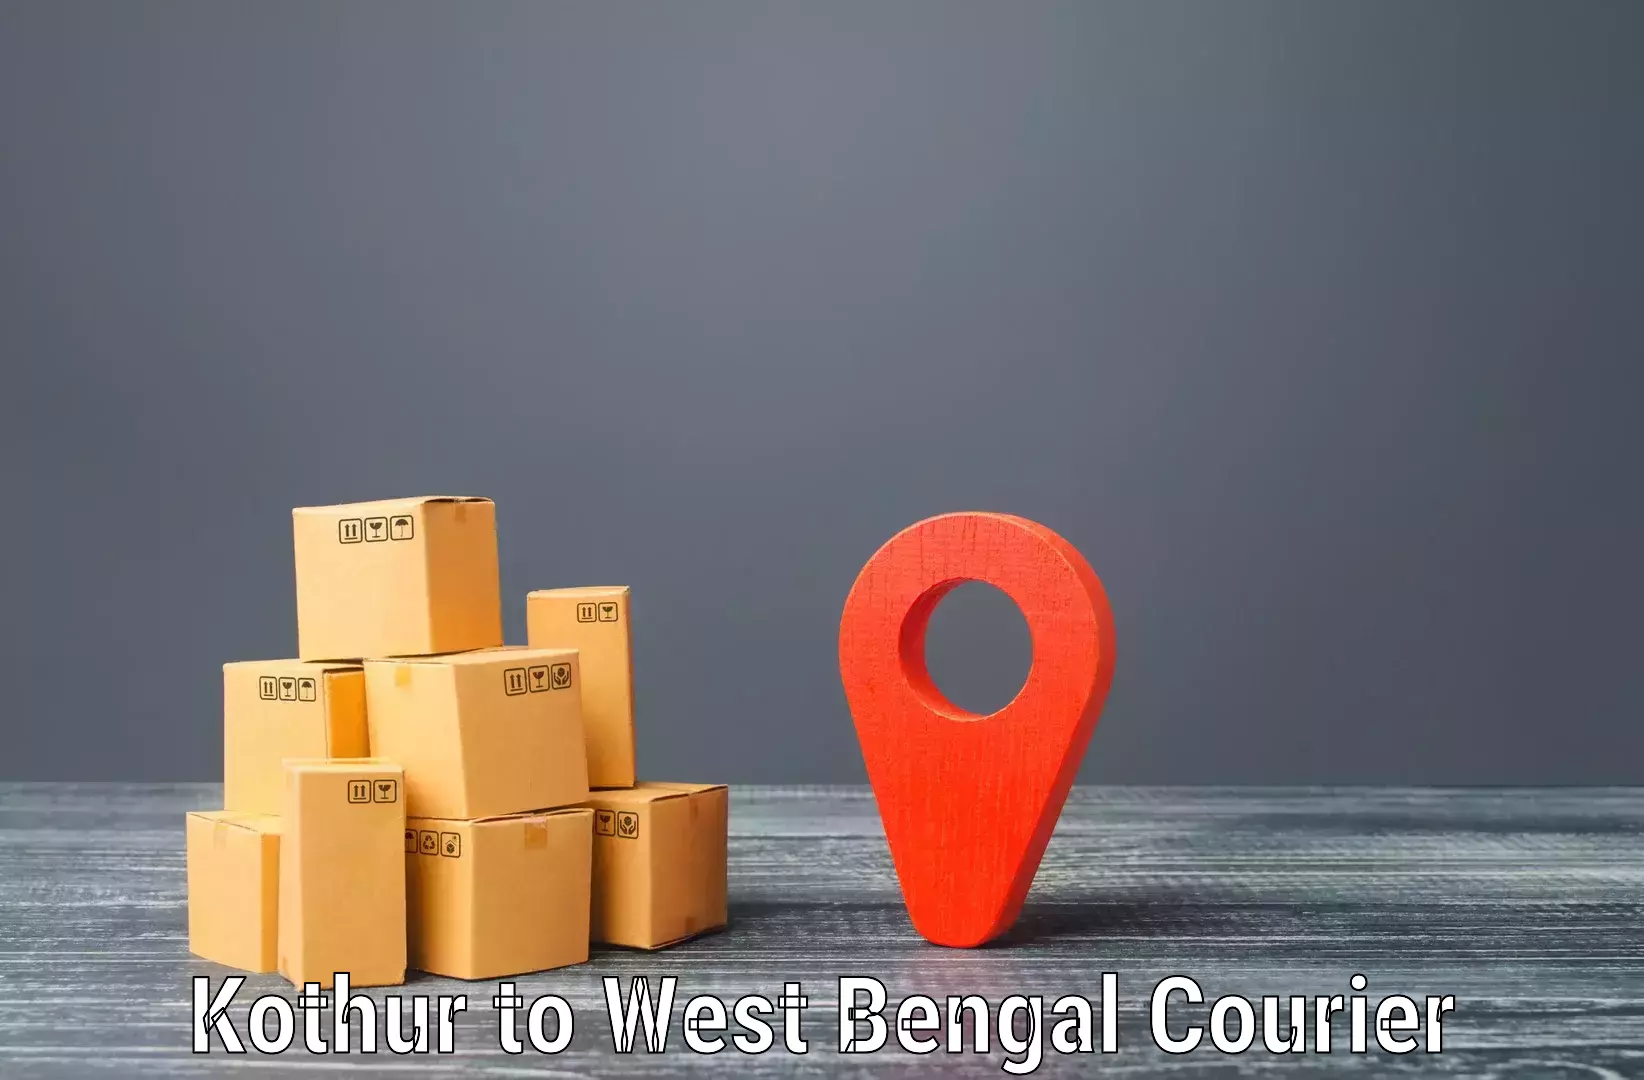 Express delivery network Kothur to Bagdogra